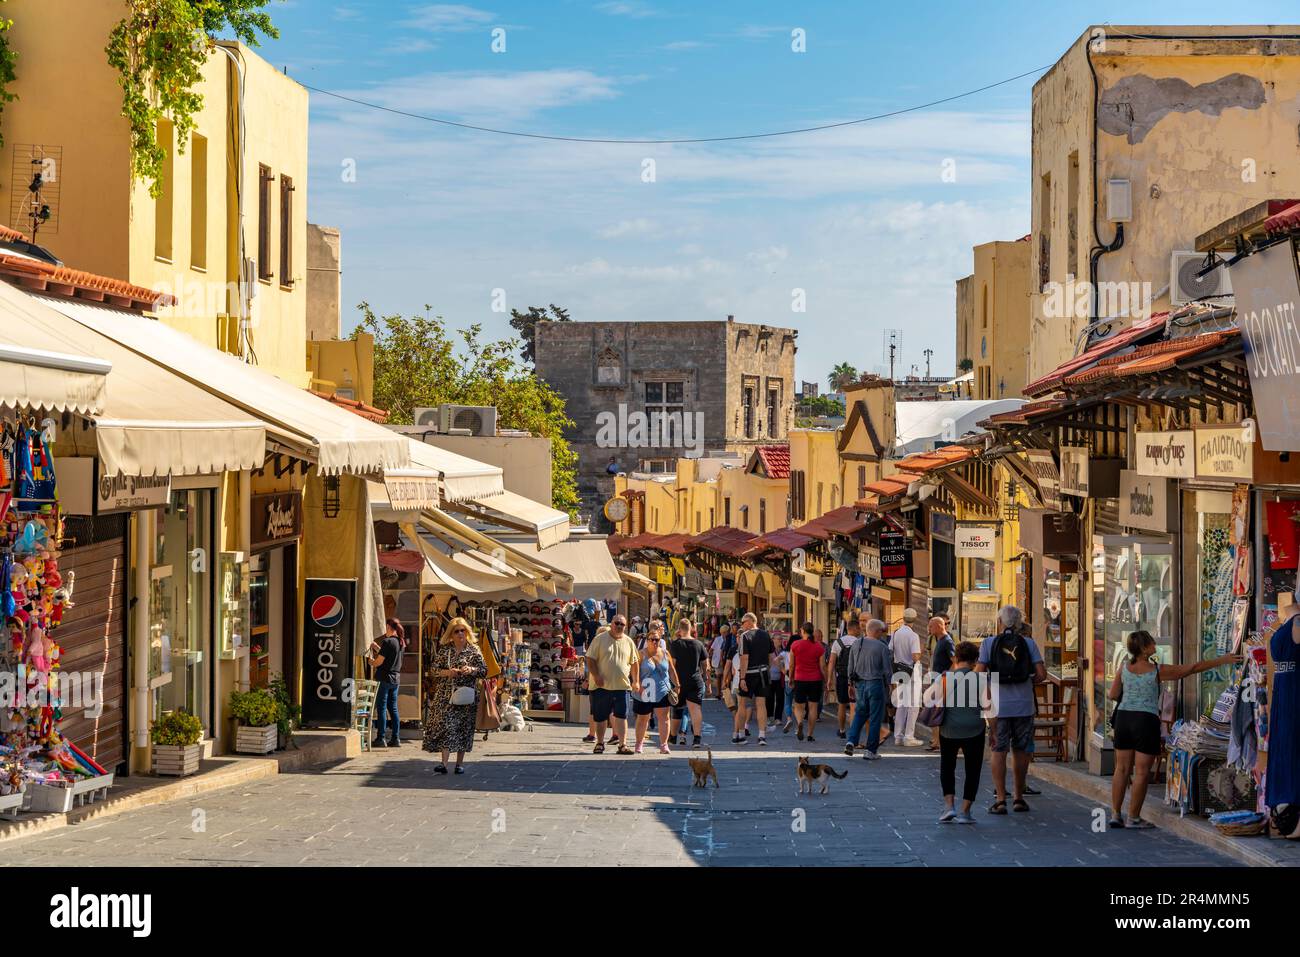 View of cafes and shops on Soktratous, Old Rhodes Town, UNESCO World Heritage Site, Rhodes, Dodecanese, Greek Islands, Greece, Europe Stock Photo